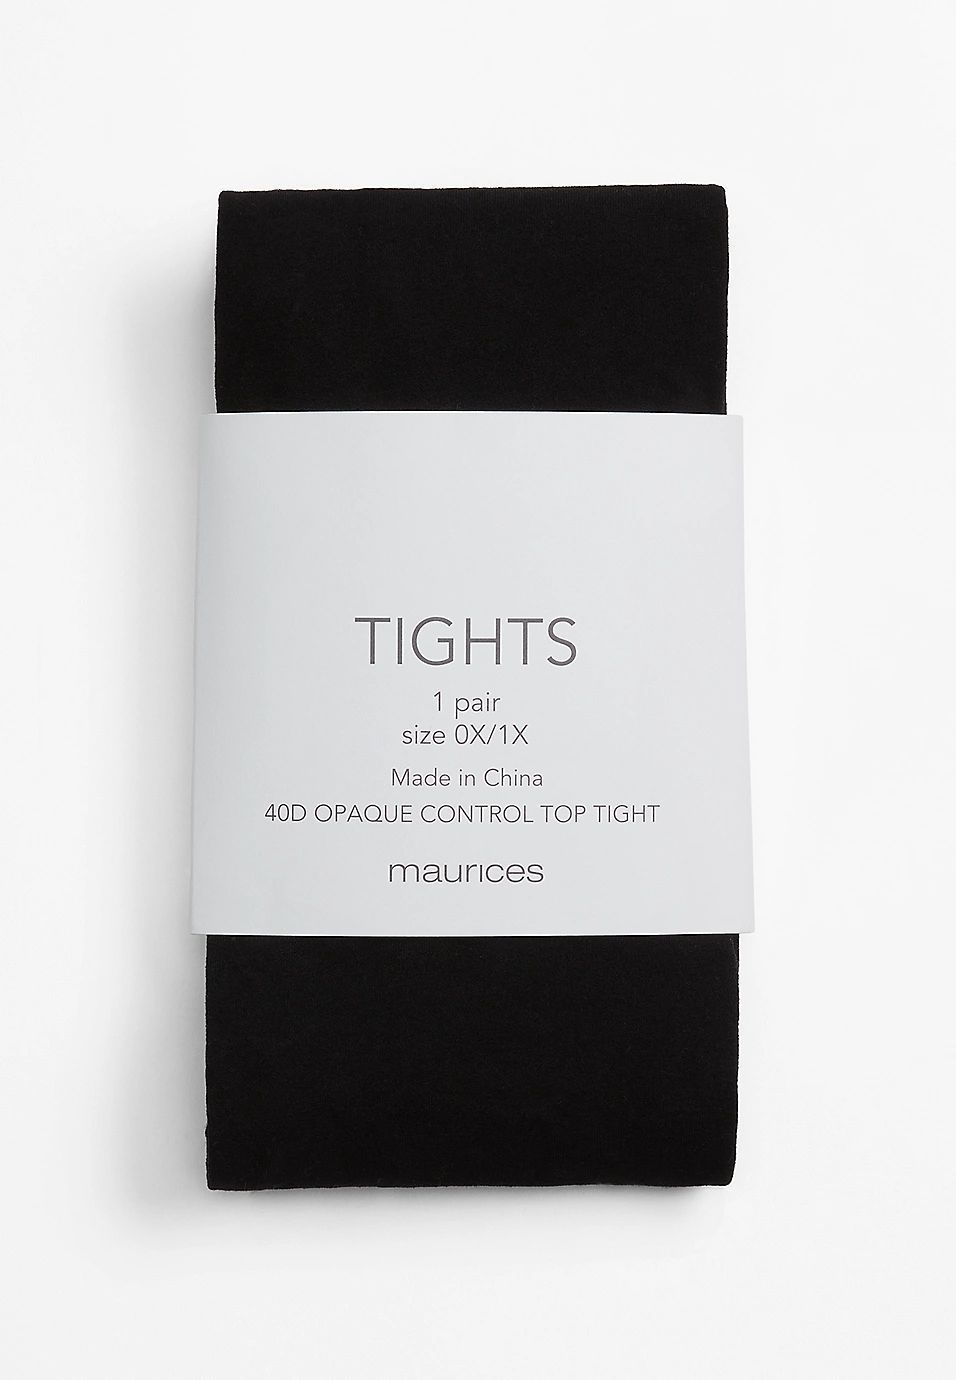 Black 40D Opaque Control Top Tights | Maurices